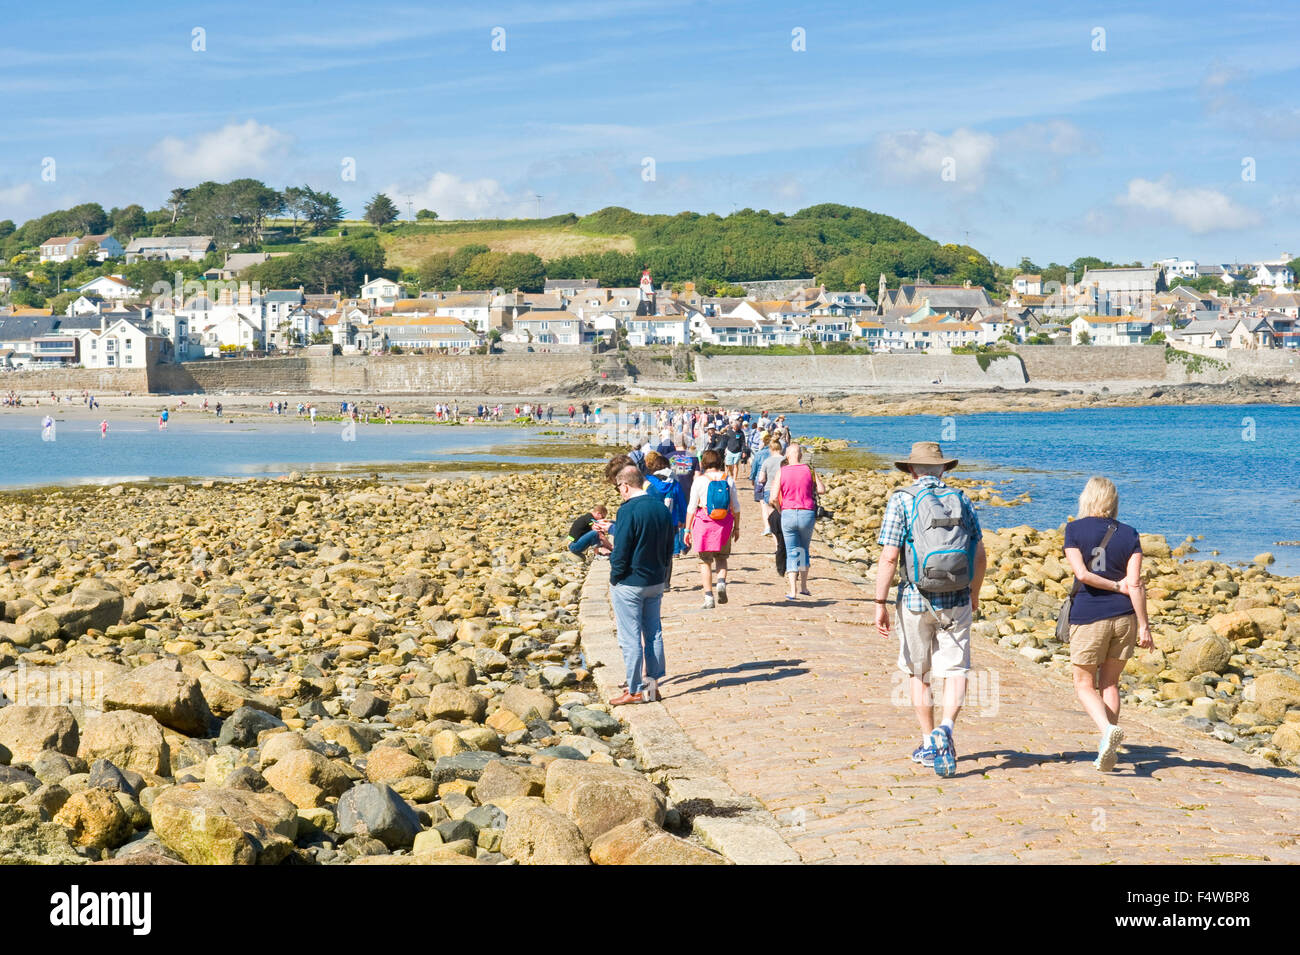 A view of people walking to and from St Michael's Mount along the causeway with the town of Marazion in the background. Stock Photo